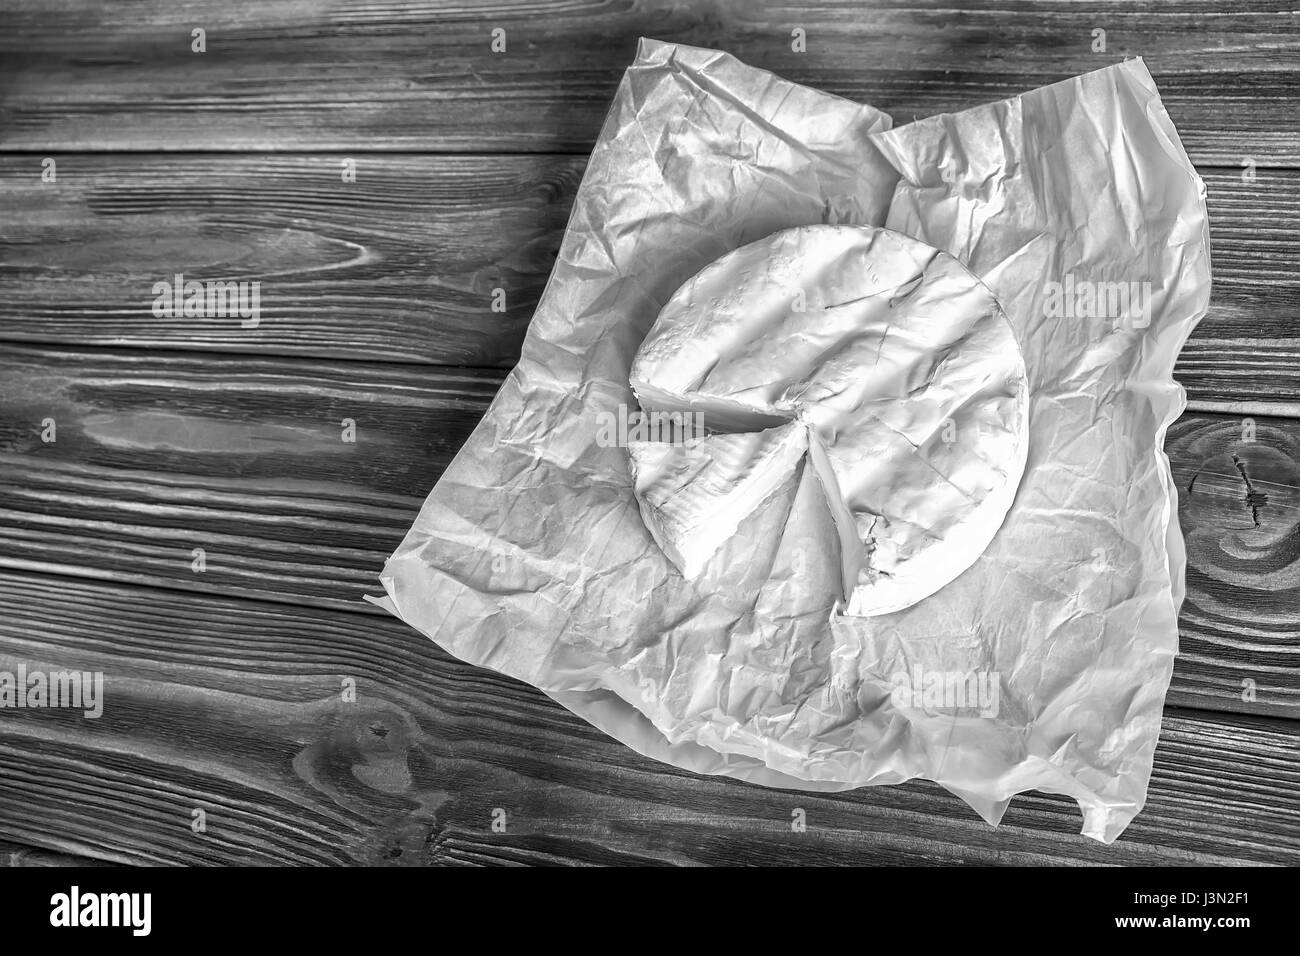 Camembert cheese on white paper and rustic dark wooden background. Top view. Black and white Stock Photo